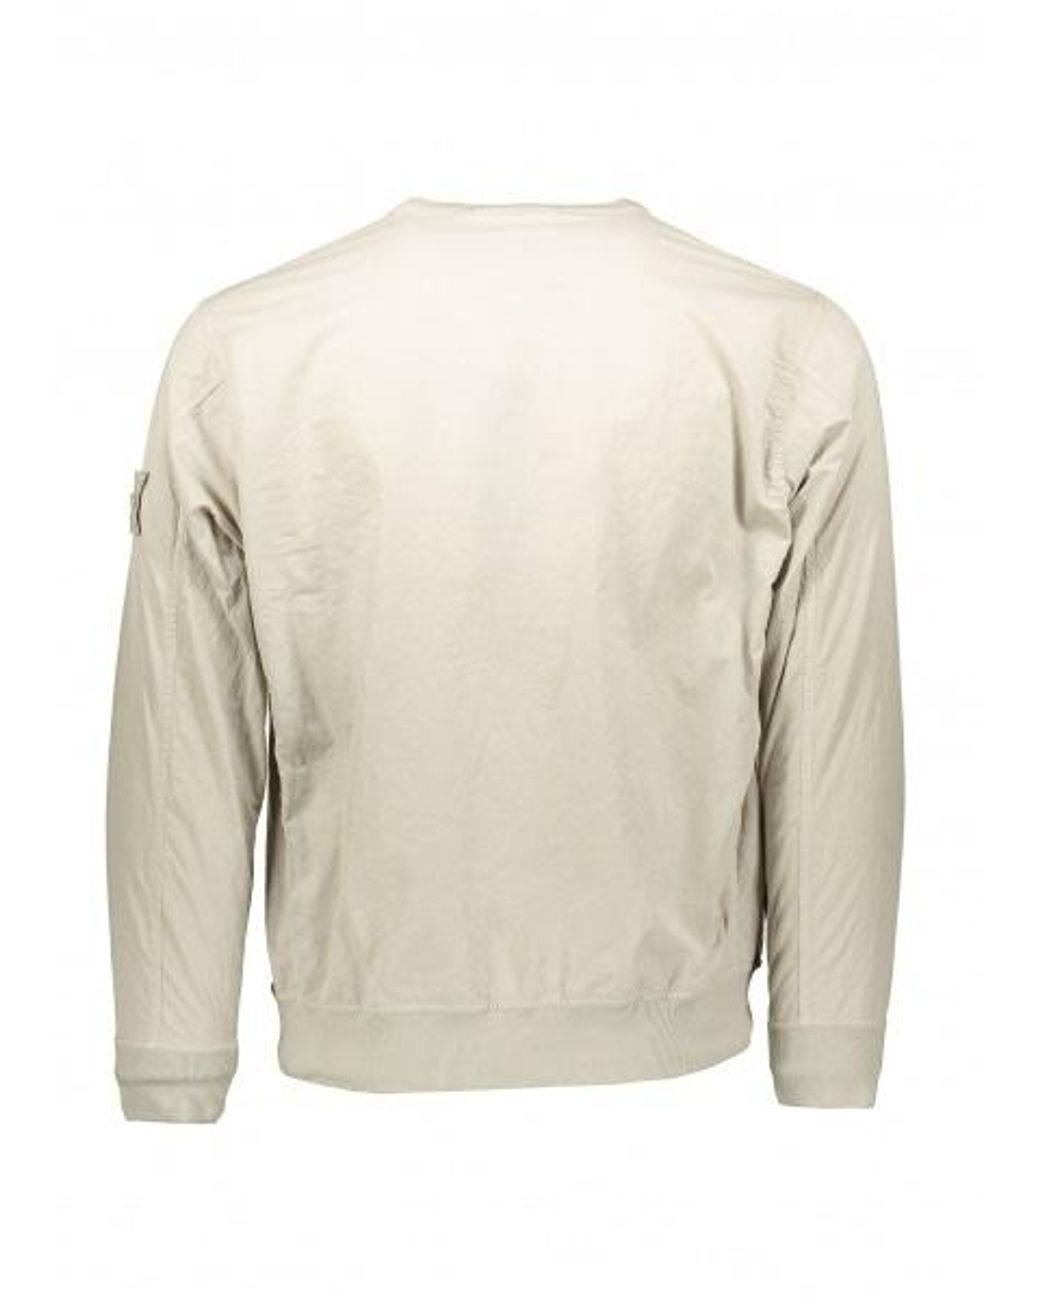 Stone Island Ghost Cotton Resin Sweater in Natural for Men | Lyst UK